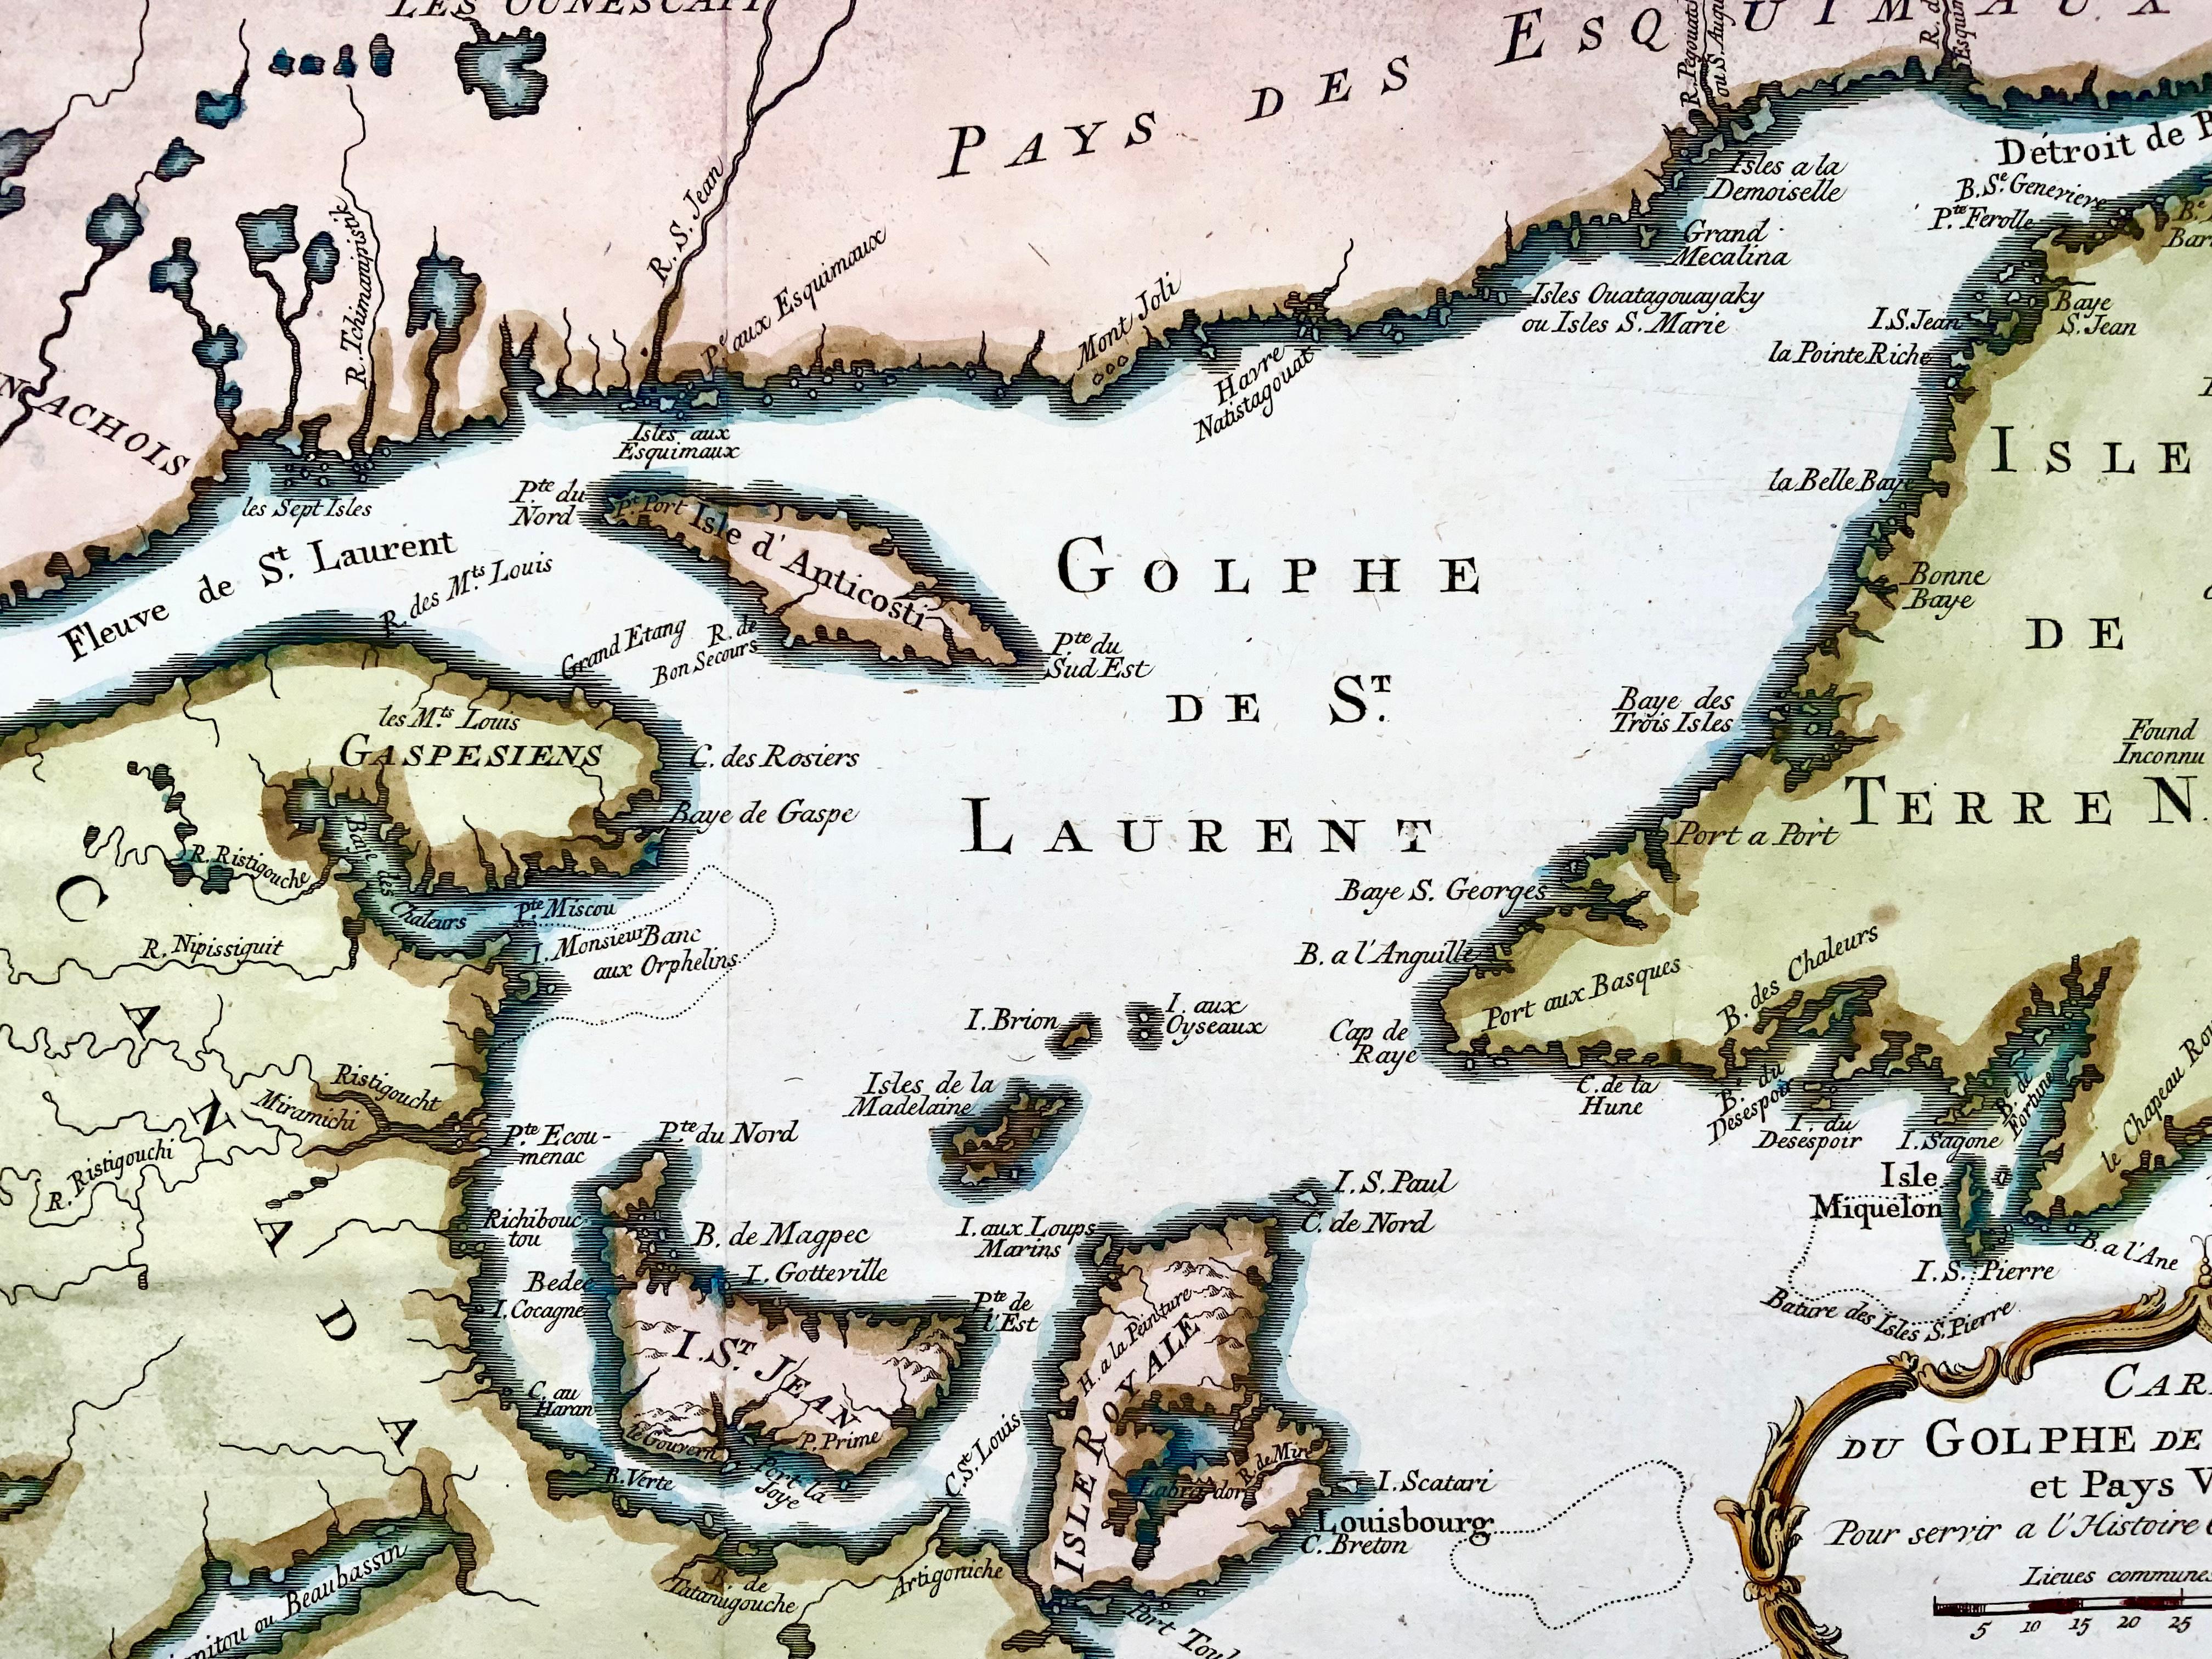 J.V. Schley after Bellin

‘Carte du Golphe de St. Laurent et Pays Voisins’

Size: 14.2 x 8.6 inches 36.1 x 21.8 cm

First state of this nice copper engraved map of St. Lawrence Bay with Anticosti Island, Prince Edward Island, Cape Breton